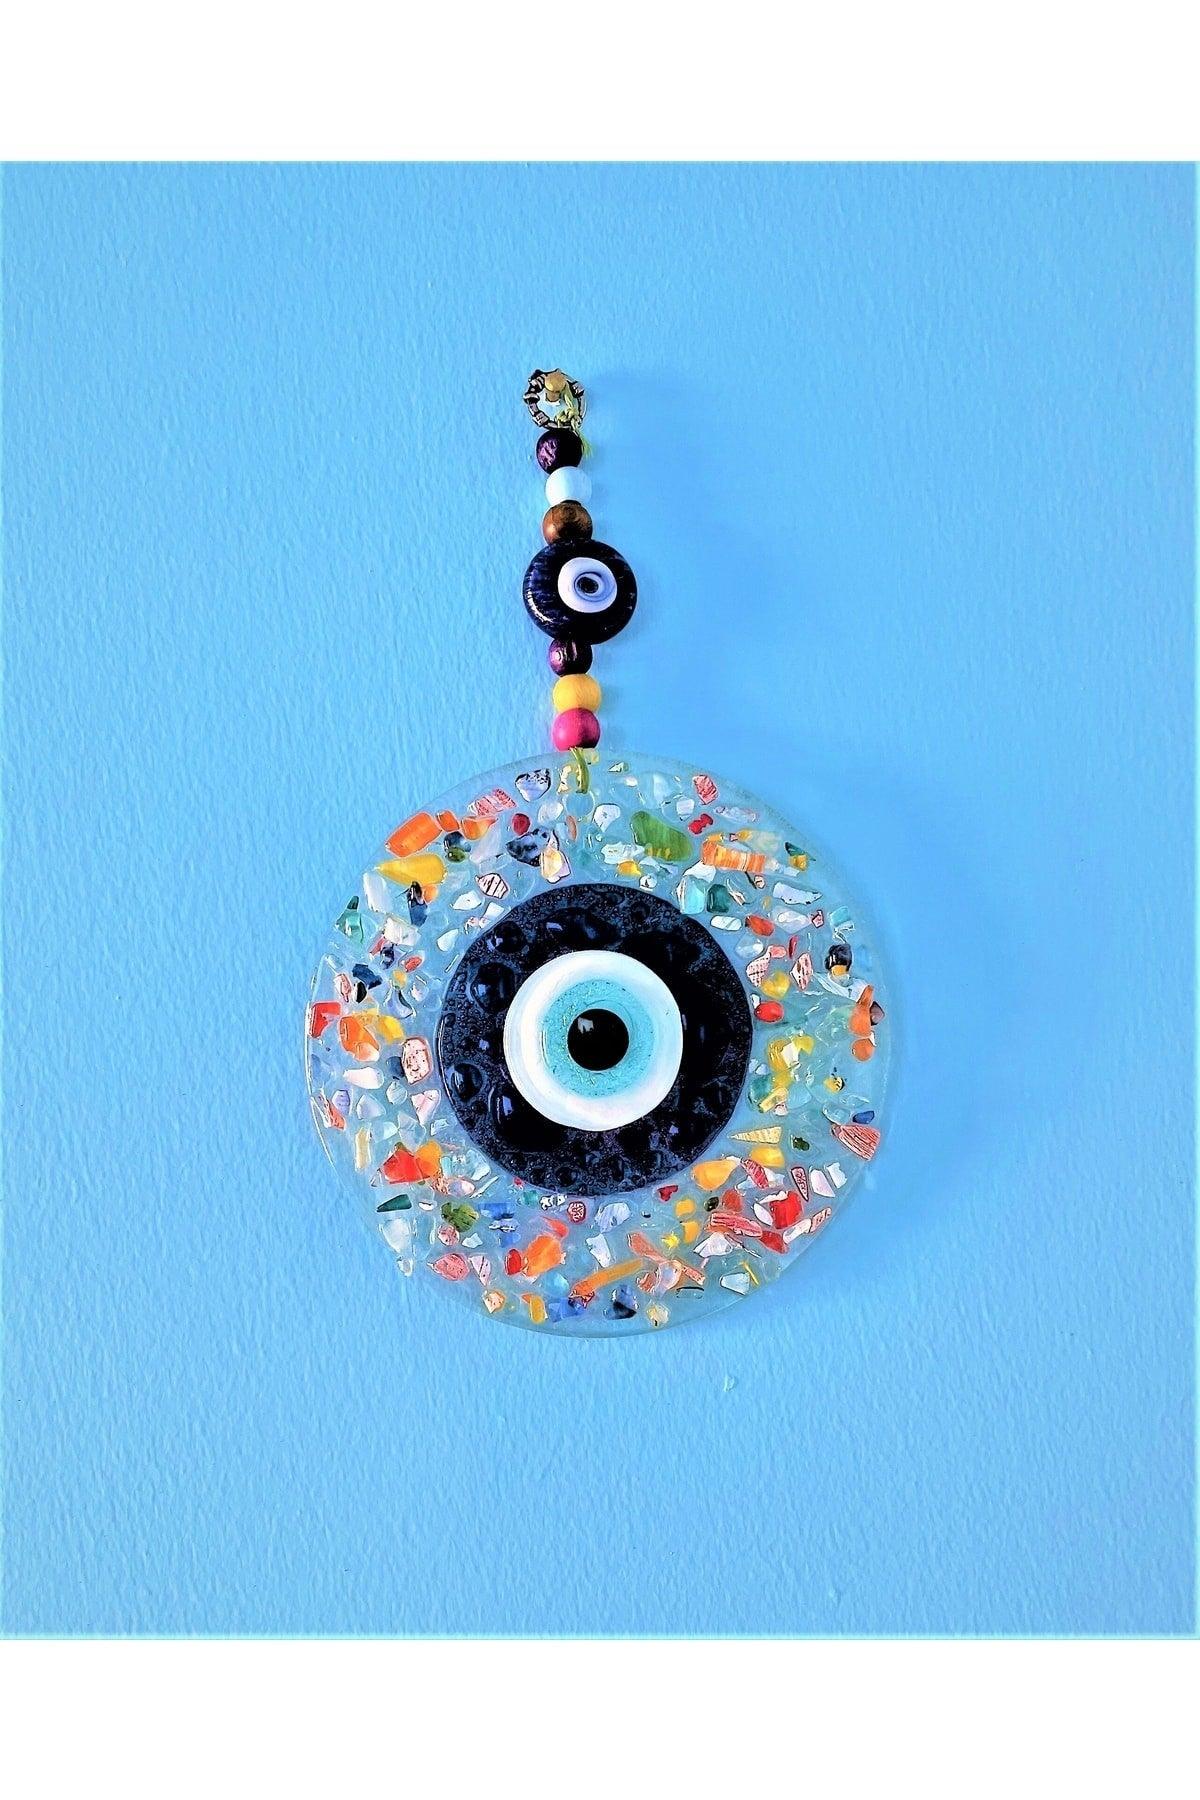 Blue Evil Eye Beads Cut Colored Glass Patterned Wall Ornament Charms - Swordslife